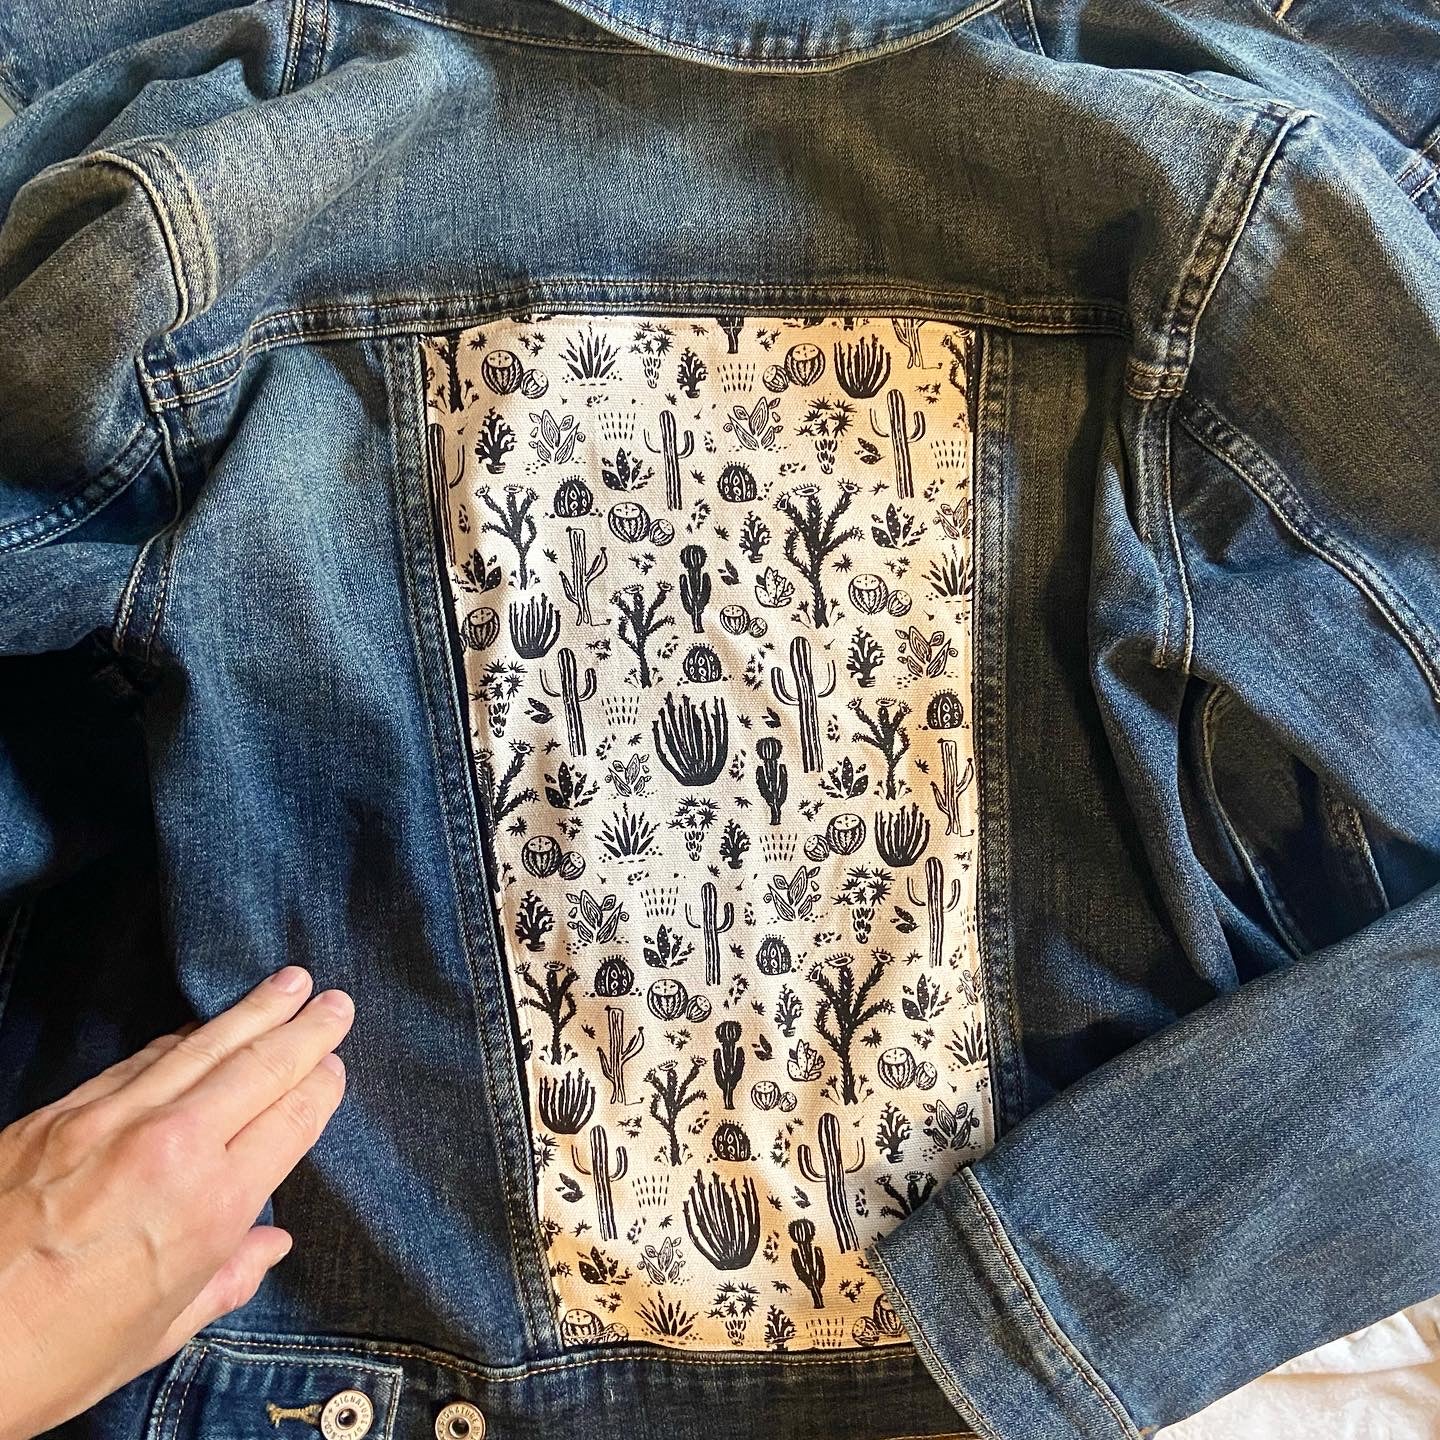 One of a Kind Upcycled Jean with Hand Printed Cactus Cotton Fabric